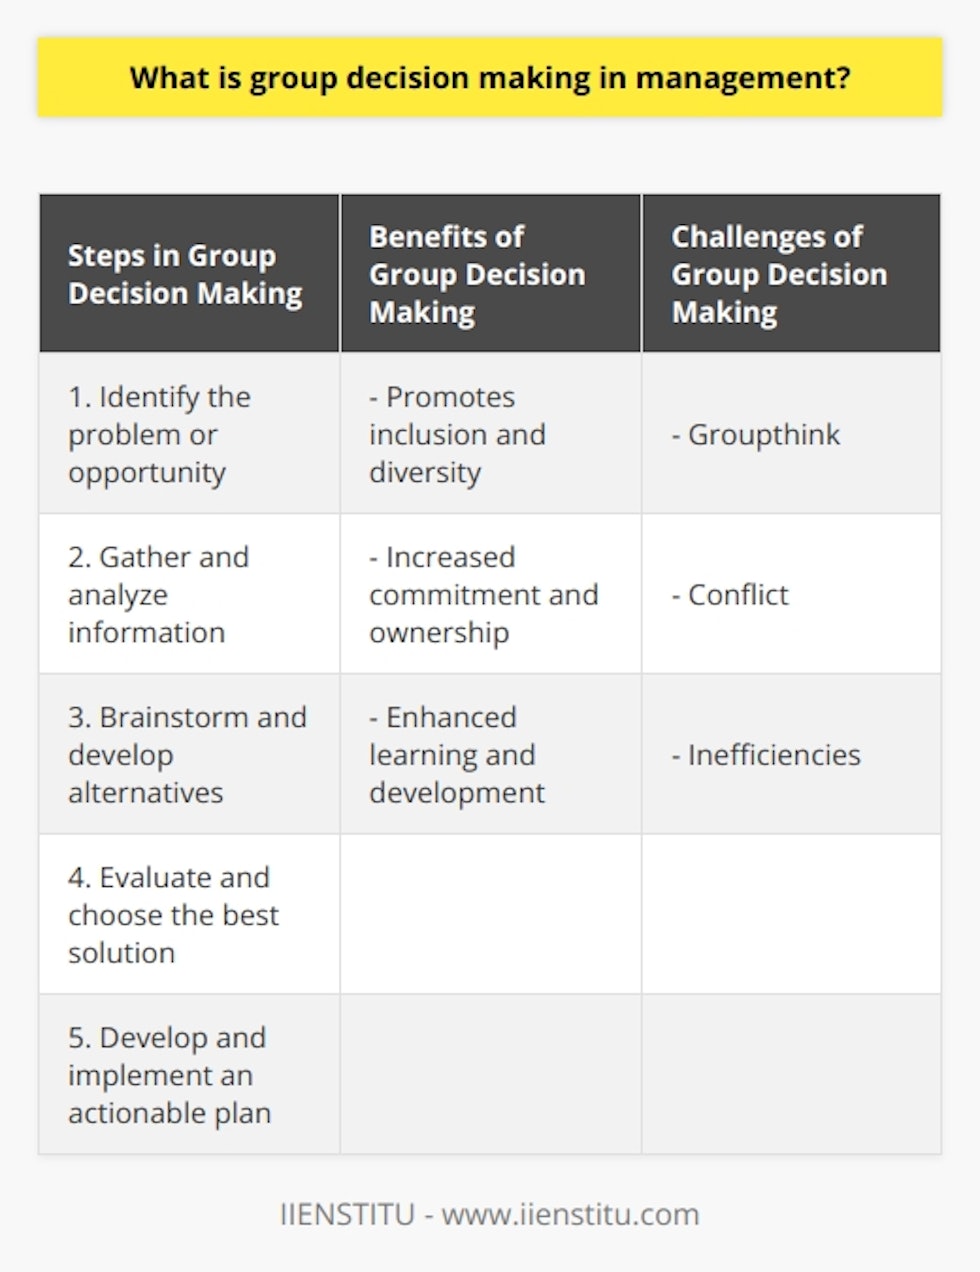 Group decision making in management is a valuable process that involves multiple individuals in solving problems and making decisions in an organization. This approach utilizes the collective expertise, perspectives, and resources present in a group, resulting in more informed and effective solutions.The first step in group decision making is to identify the problem or opportunity that requires a decision. It is crucial for all group members to have a shared understanding of the situation at hand. Once the problem is defined, the group gathers and analyzes relevant information, including data, facts, and expert opinions. This helps in developing a comprehensive understanding of the issue and potential solutions.Brainstorming and developing alternatives is the next step in the process. The group generates a wide range of possible solutions, fostering creativity and open discussion to arrive at a diverse set of options. Each alternative is evaluated in terms of its consequences, risks, and feasibility, and the most promising solution is collectively chosen.After choosing the best solution, the group develops an actionable plan for its implementation and monitors its progress. This step is important to ensure the success of the decision and make any necessary adjustments along the way.There are several benefits to group decision making in management. Firstly, it promotes inclusion and diversity by involving multiple individuals with different perspectives and expertise. This diversity leads to more innovative and effective solutions. Secondly, group members are more likely to support and take ownership of solutions they have actively been involved in developing. This increases commitment and accountability within the organization. Lastly, working collaboratively on decision making allows individuals to learn from one another, building relationships and acquiring new skills that can enhance their overall performance.While there are many benefits, group decision making can also present challenges. One common challenge is groupthink, where the desire for consensus overrides critical thinking and dissenting views are suppressed. Conflict can also arise due to differing opinions within the group. Inefficiencies may occur if the decision-making process is not well-defined or if there is a lack of effective communication.To address these challenges, organizations can promote open communication and encourage diverse viewpoints. They can establish clear decision-making processes and provide training and support to enhance collaborative skills. By overcoming these obstacles, organizations can fully utilize the potential of group decision making to drive growth, innovation, and success.In conclusion, group decision making in management is a collaborative process that involves multiple individuals in solving problems and making decisions. It offers numerous benefits, such as inclusion, increased commitment, and enhanced learning. However, challenges like groupthink, conflict, and inefficiencies need to be overcome through effective communication, diverse perspectives, and clear decision-making processes. By doing so, organizations can harness the power of group decision making for optimal outcomes.